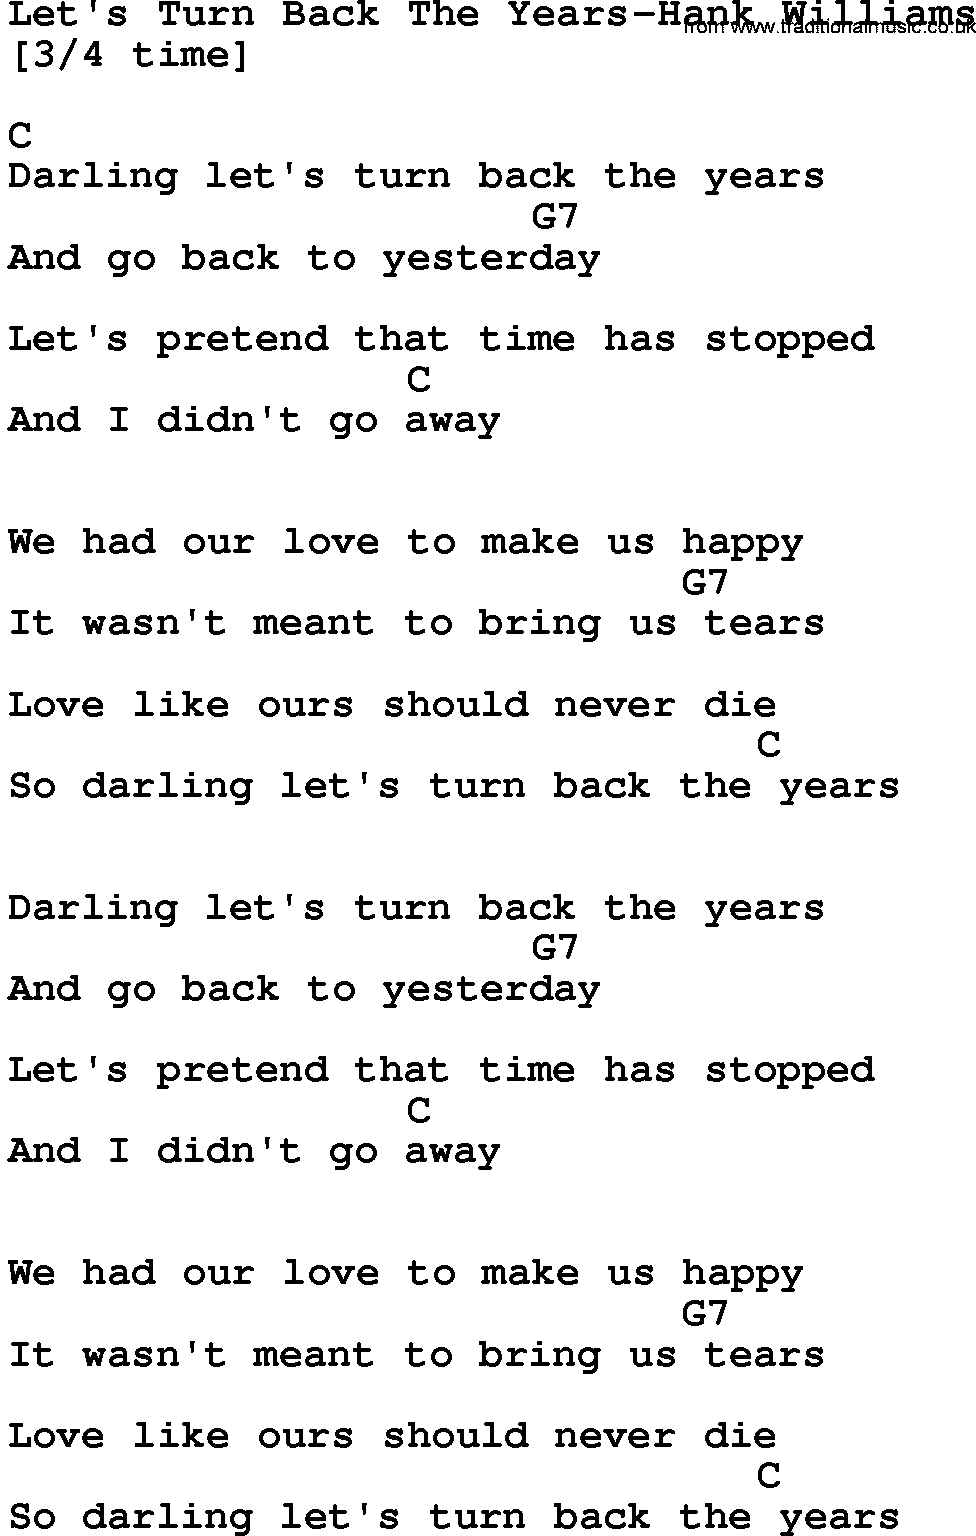 Country music song: Let's Turn Back The Years-Hank Williams lyrics and chords